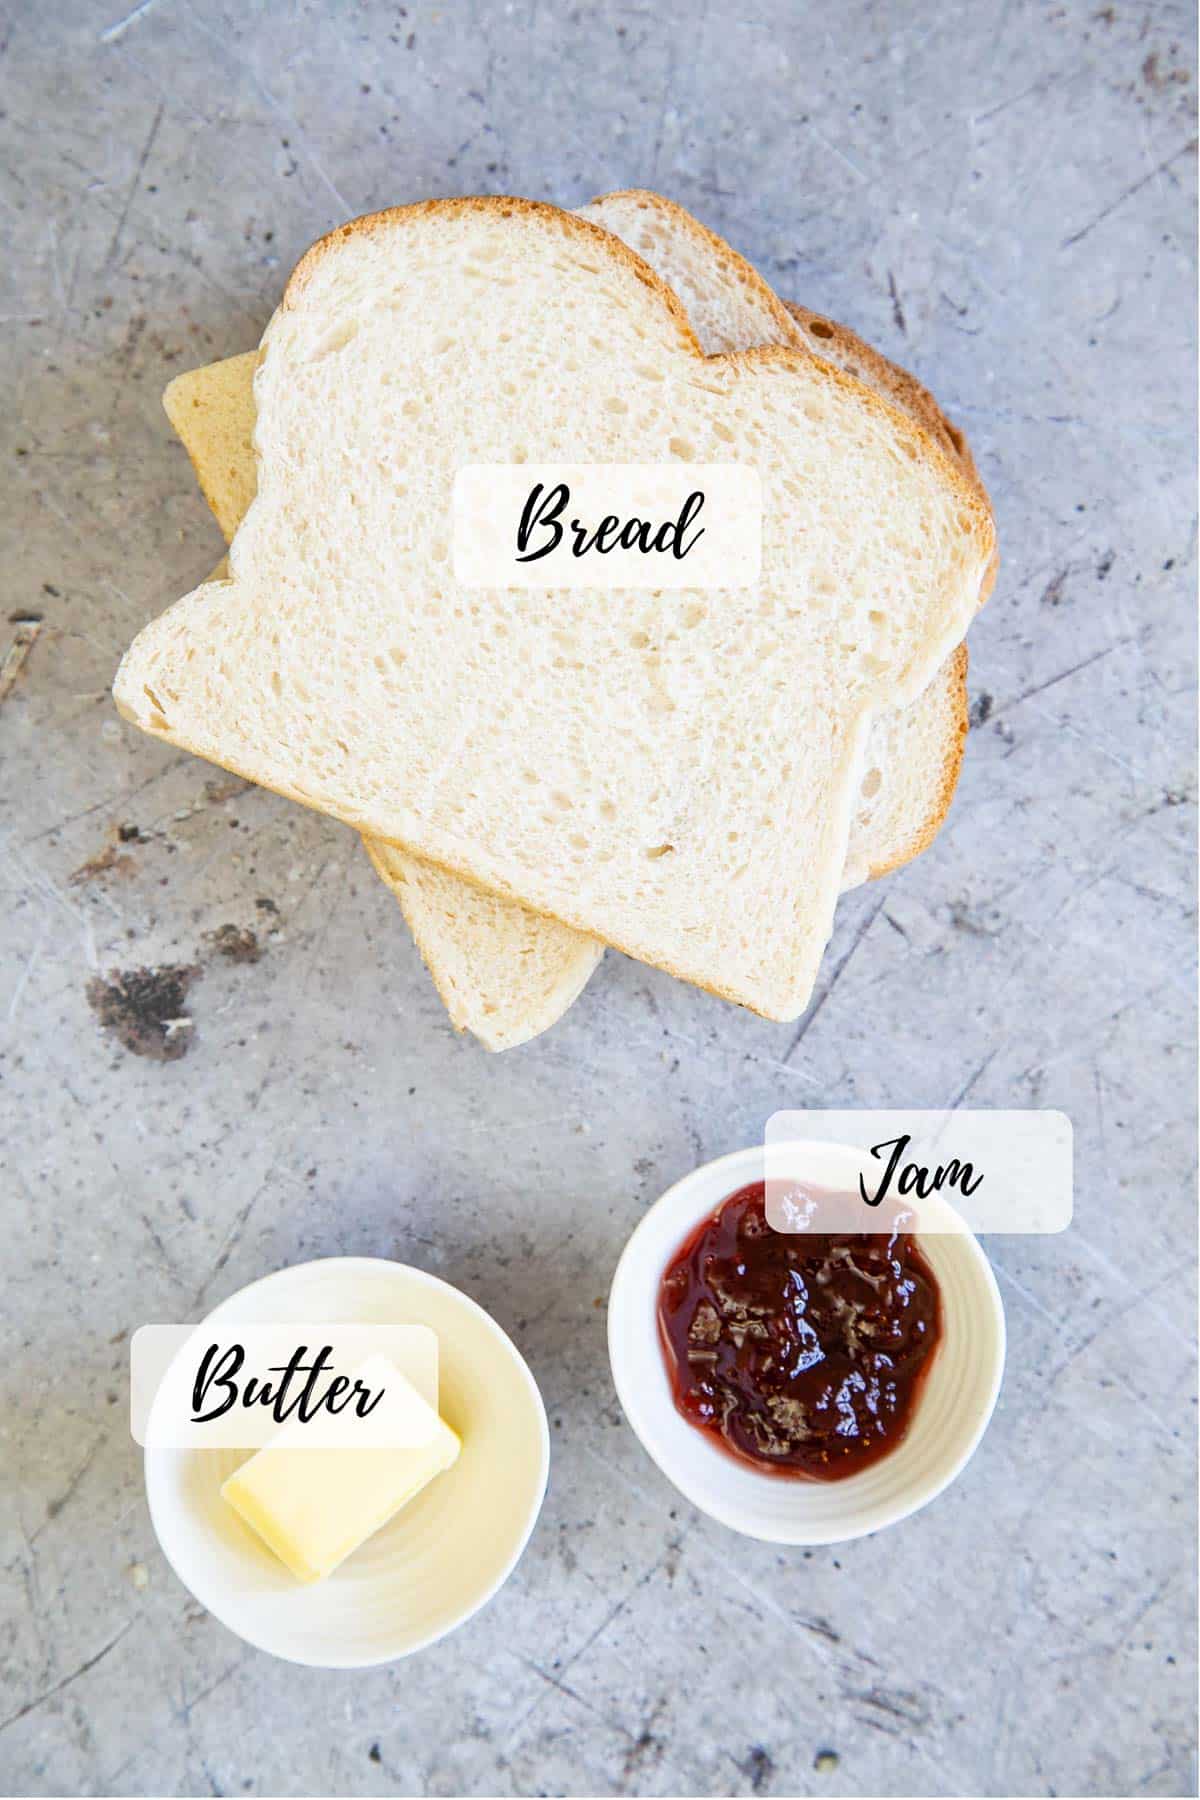 Ingredients for the perfect jam sandwich: soft white bread, red jam and butter.